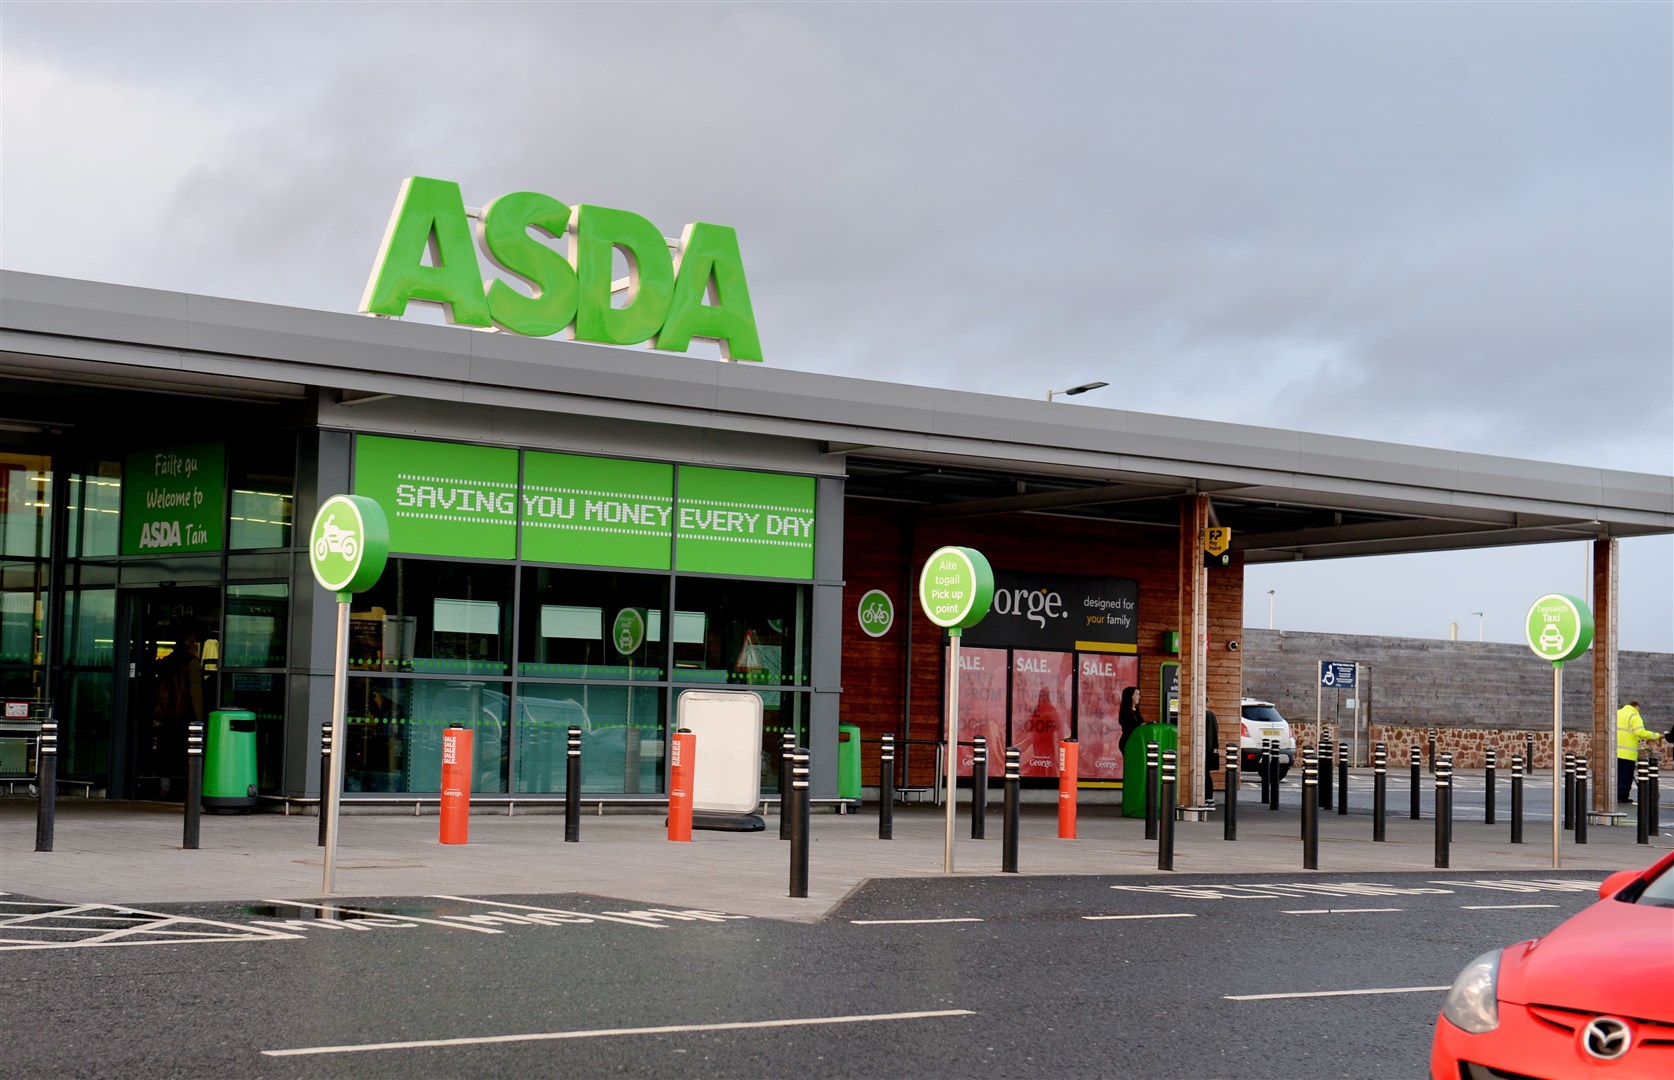 Sanders had attempted to remove security tags from CDs at the Asda store in Tain.